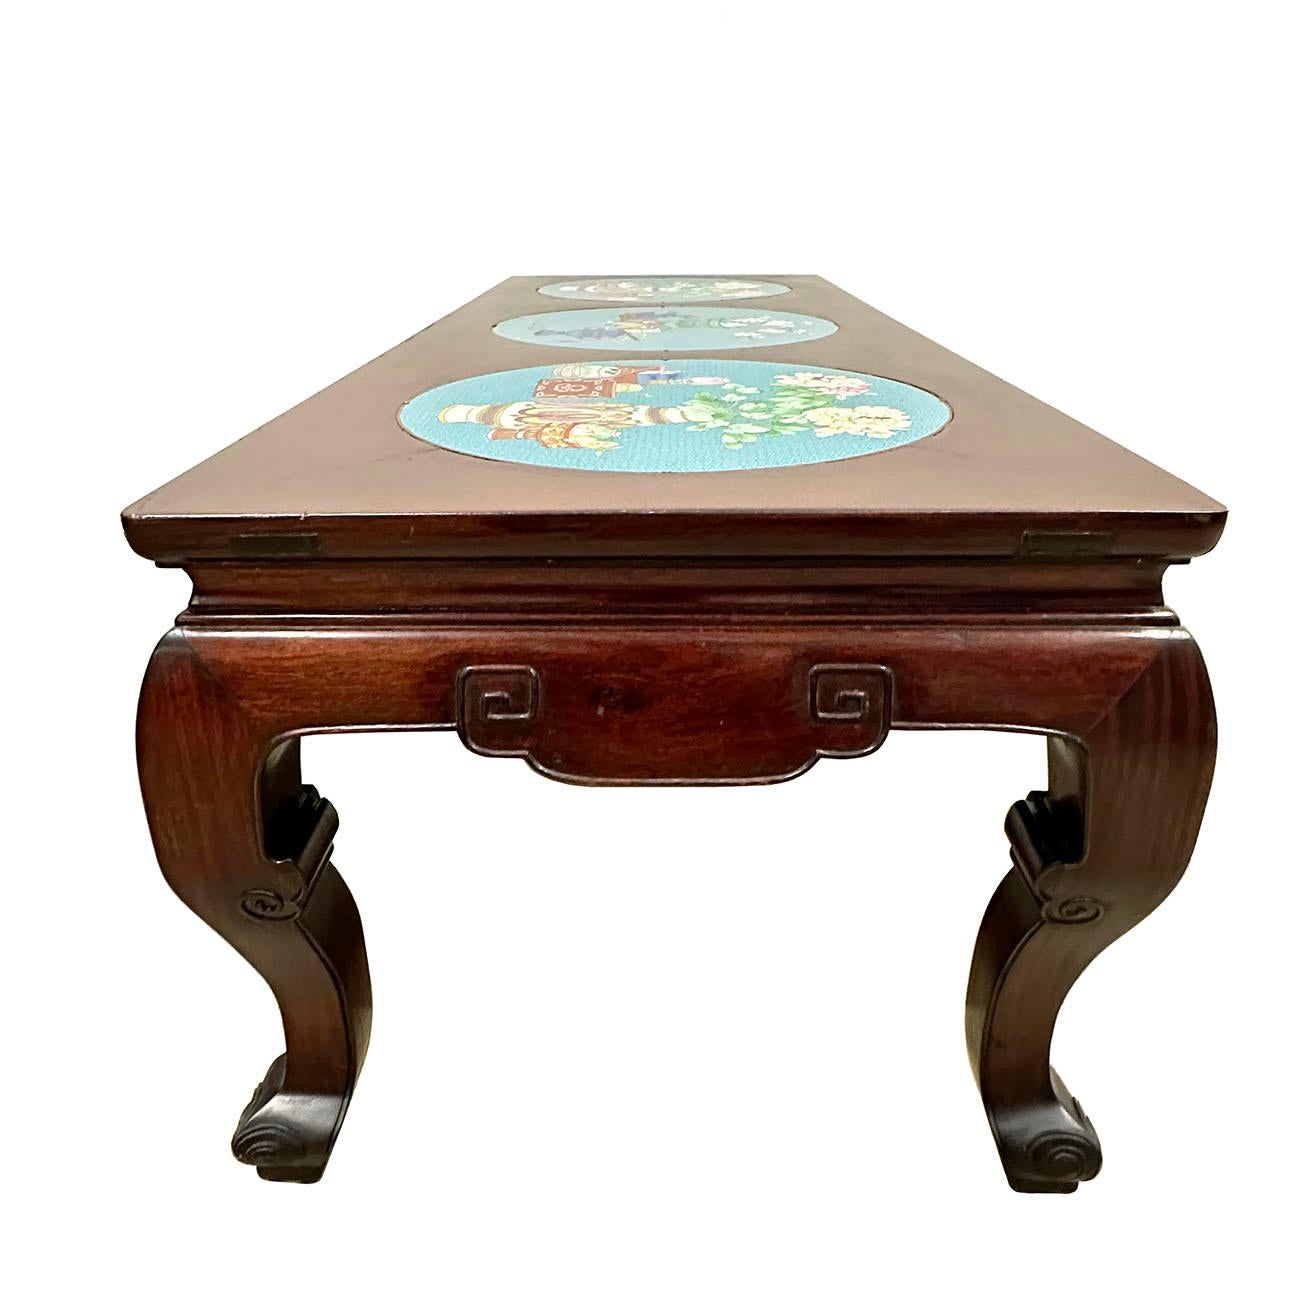 Early 20th Century Chinese Carved Hardwood Coffee Table With Cloisonne Inlay on  For Sale 4